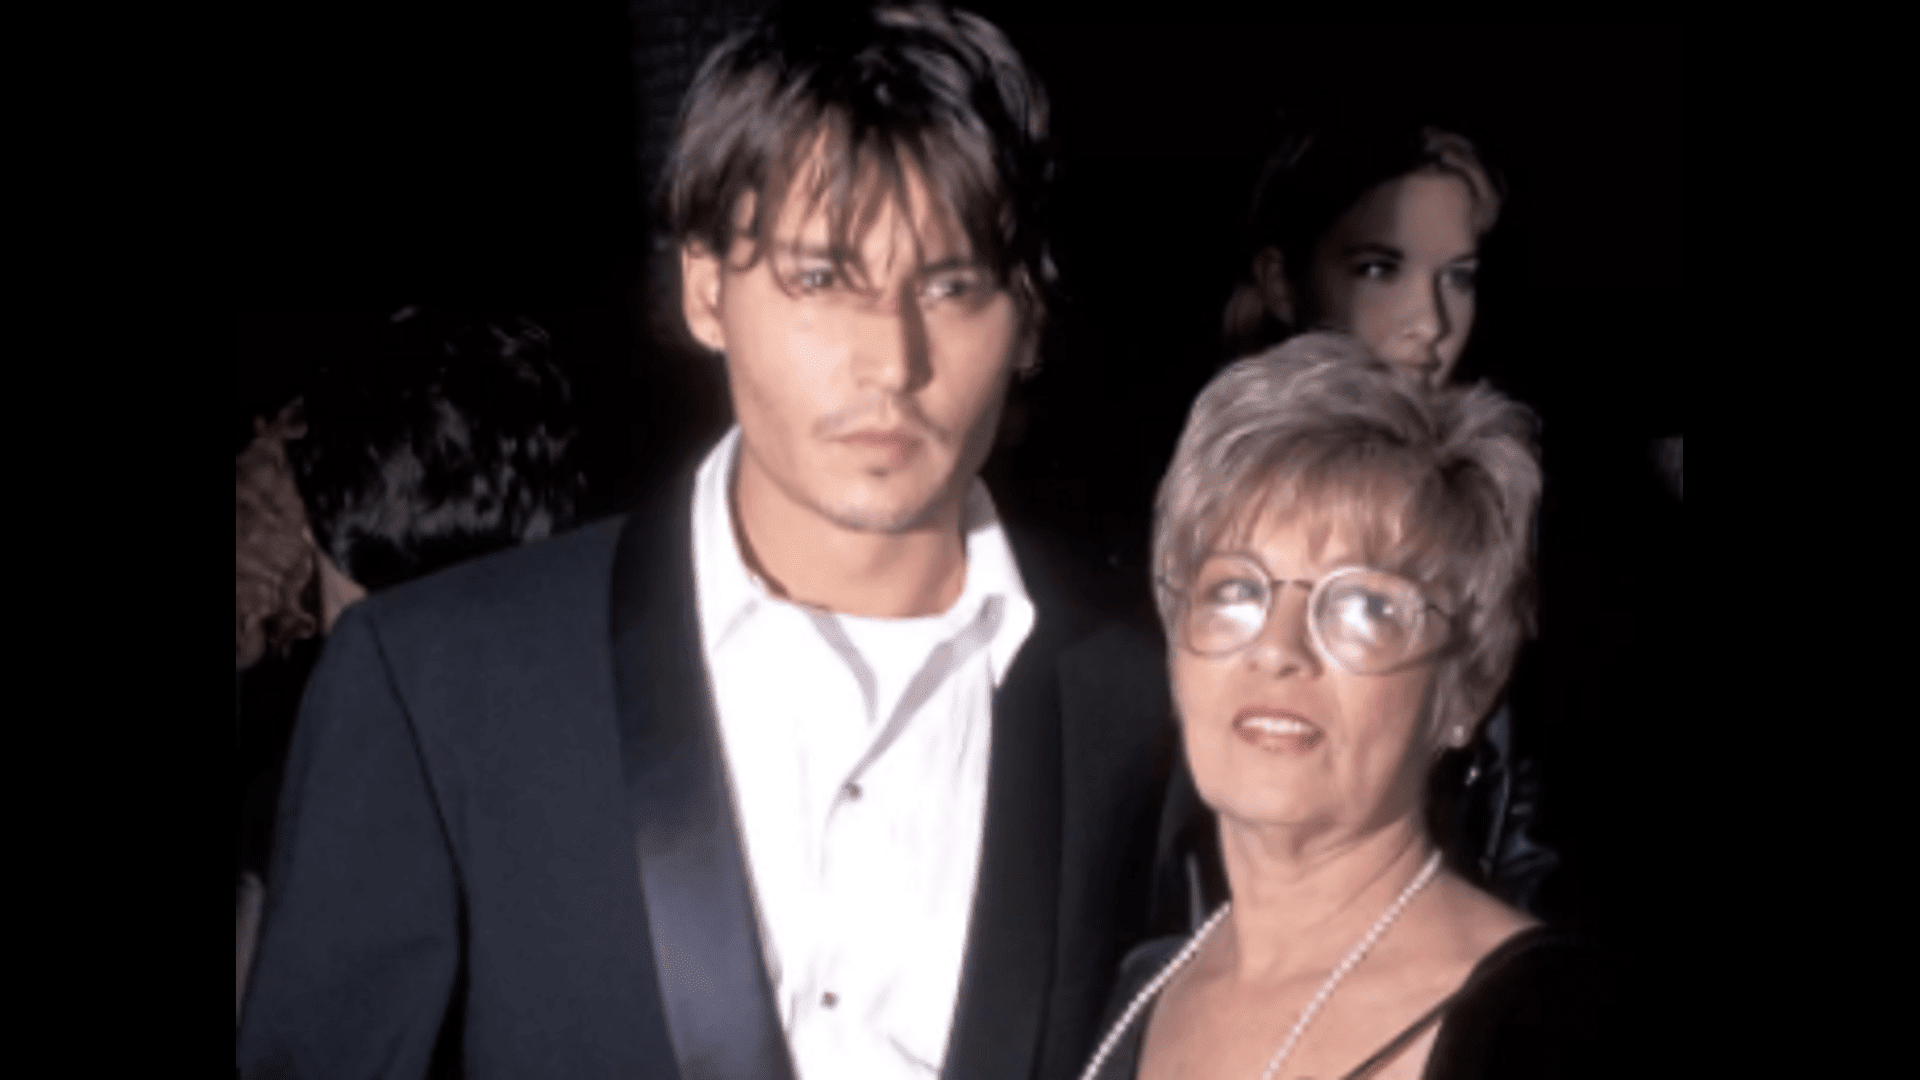 Johnny Depp's sister opens up about physical abuse by their mother